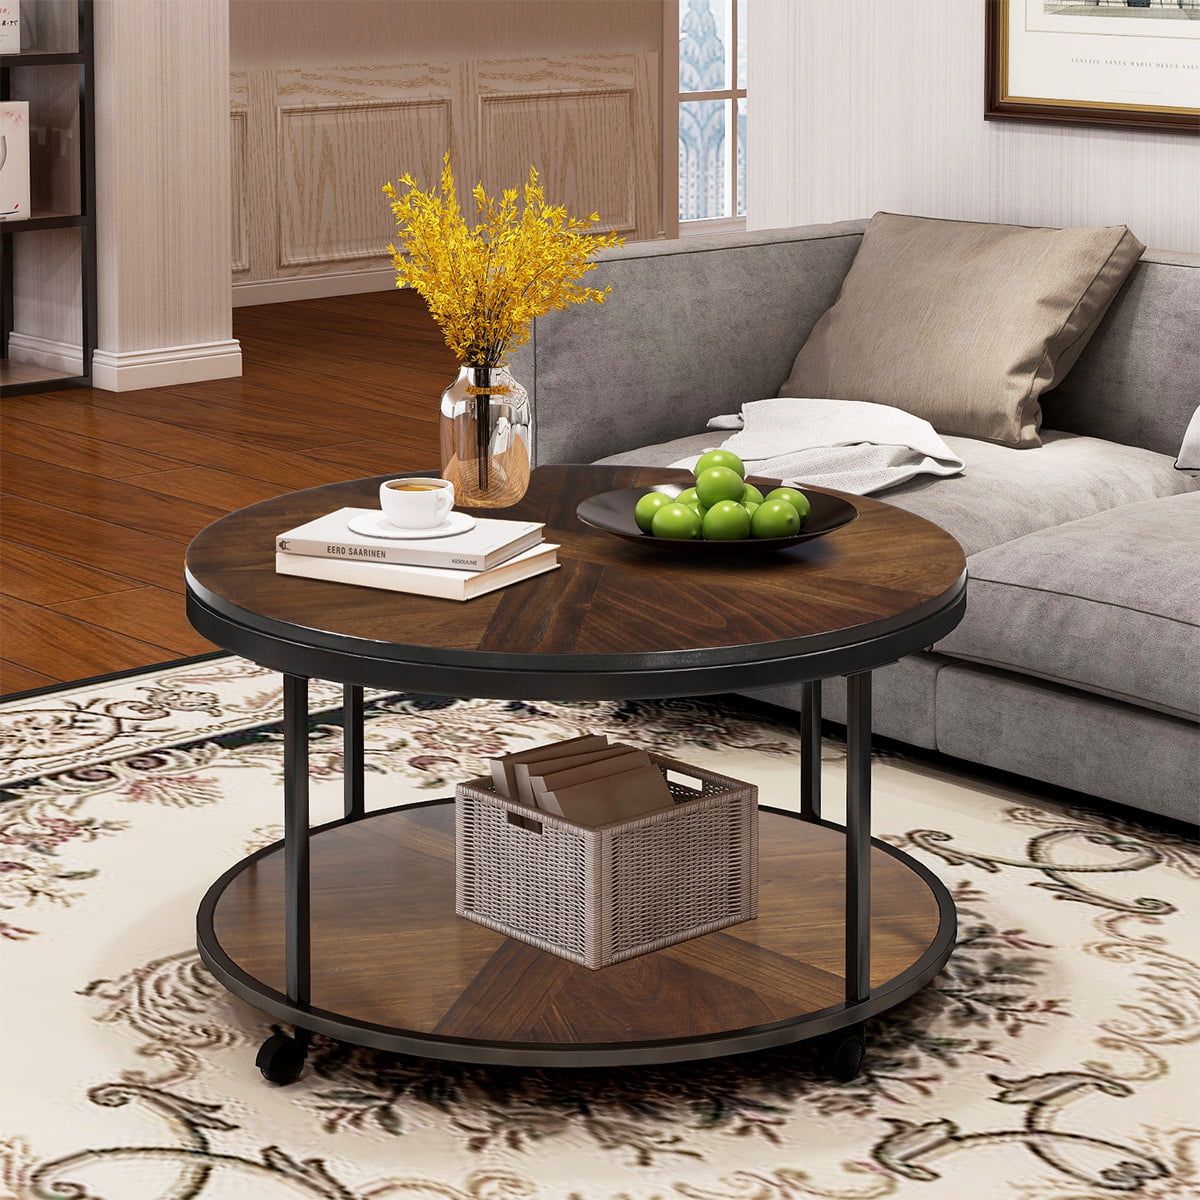 Sentern Round Coffee Table With Caster Wheels And Unique Textured Intended For Round Coffee Tables With Steel Frames (Gallery 19 of 21)